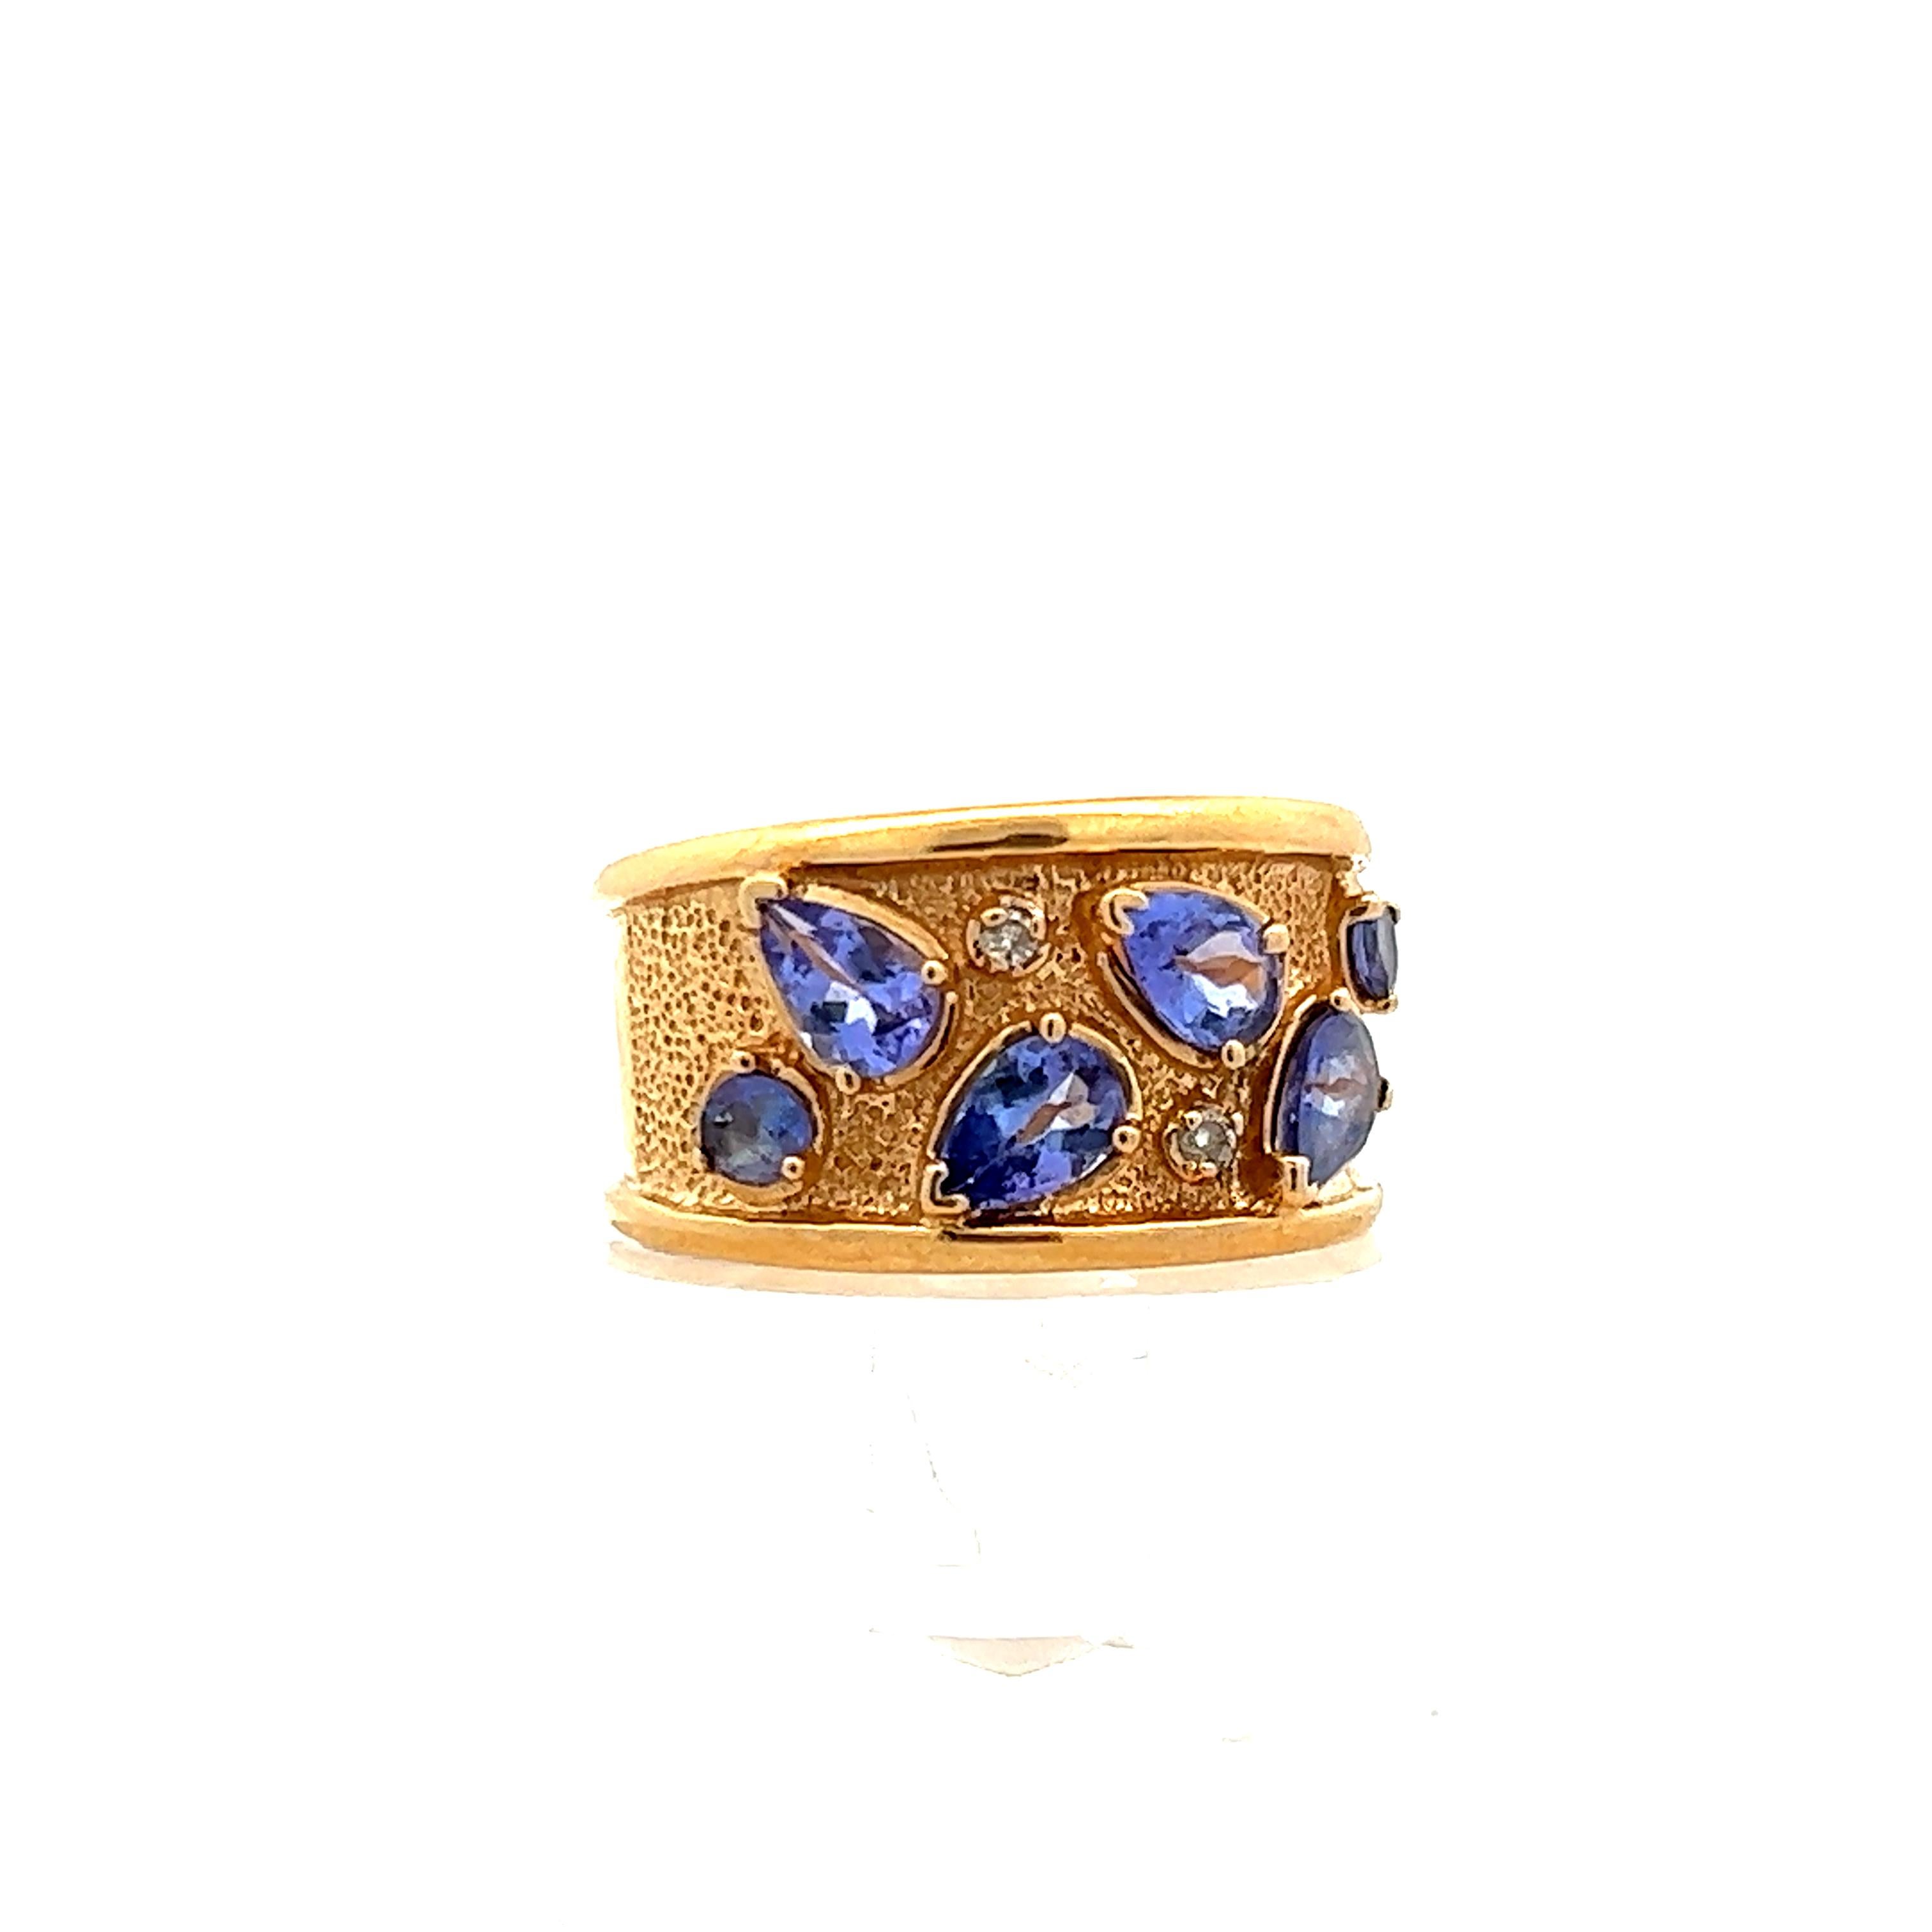 This lovely 14k yellow gold ring/cigar band features  pear and round shaped tanzanite as well as diamond. The combination of the 14k yellow gold and lovely tanzanite is timeless and elegant. The color blend so beautifully and makes for an accessory